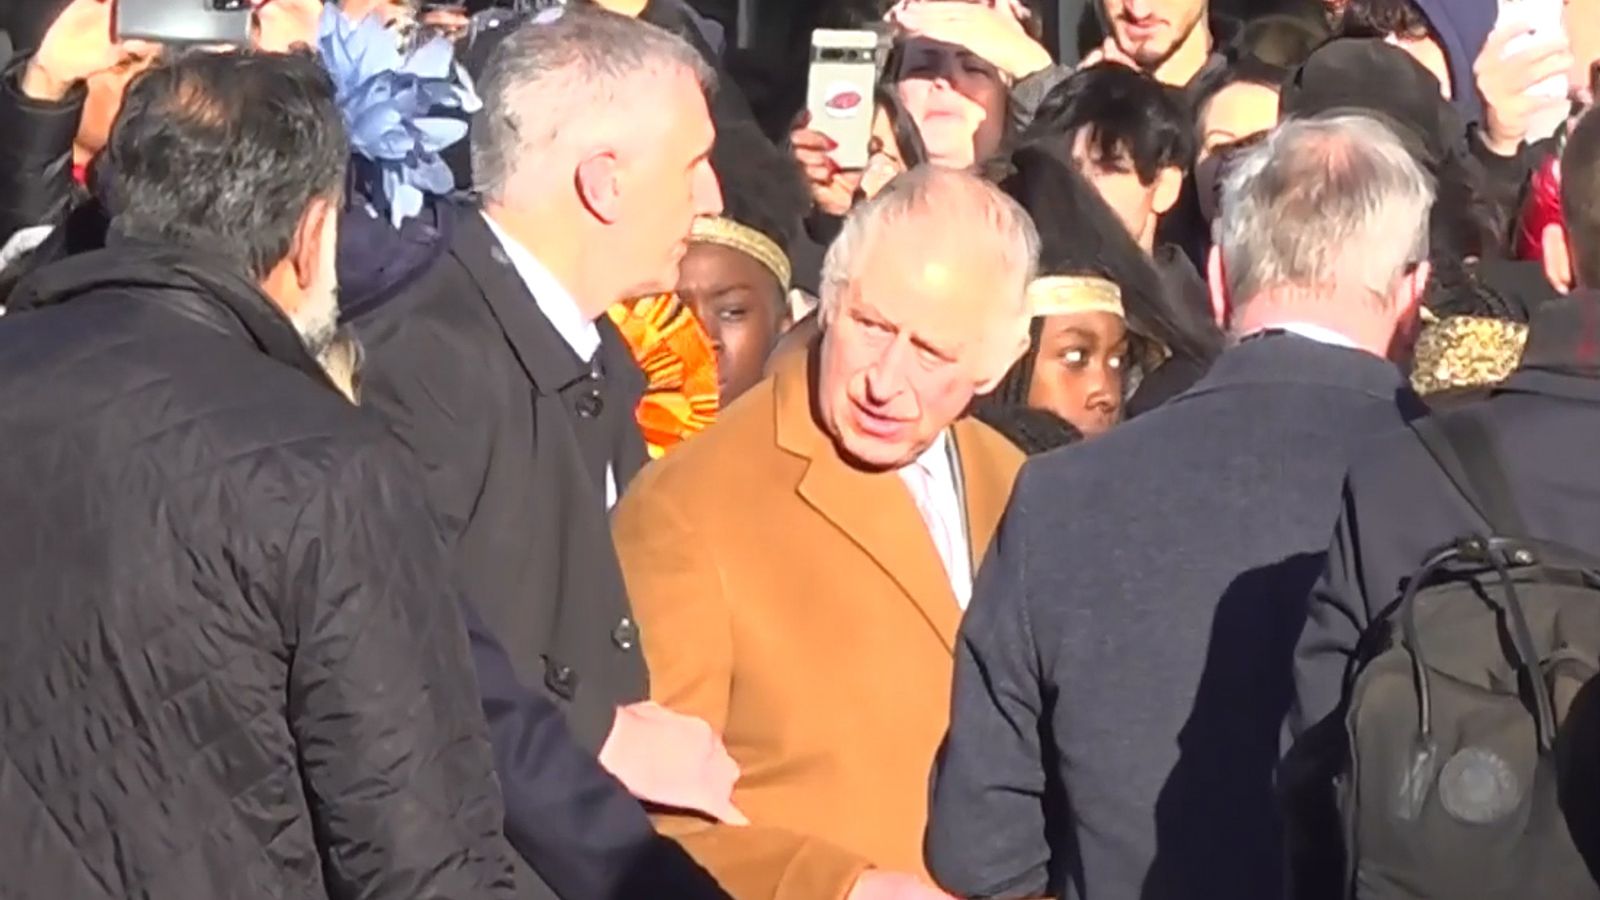 Man arrested after egg thrown at the King during Luton visit